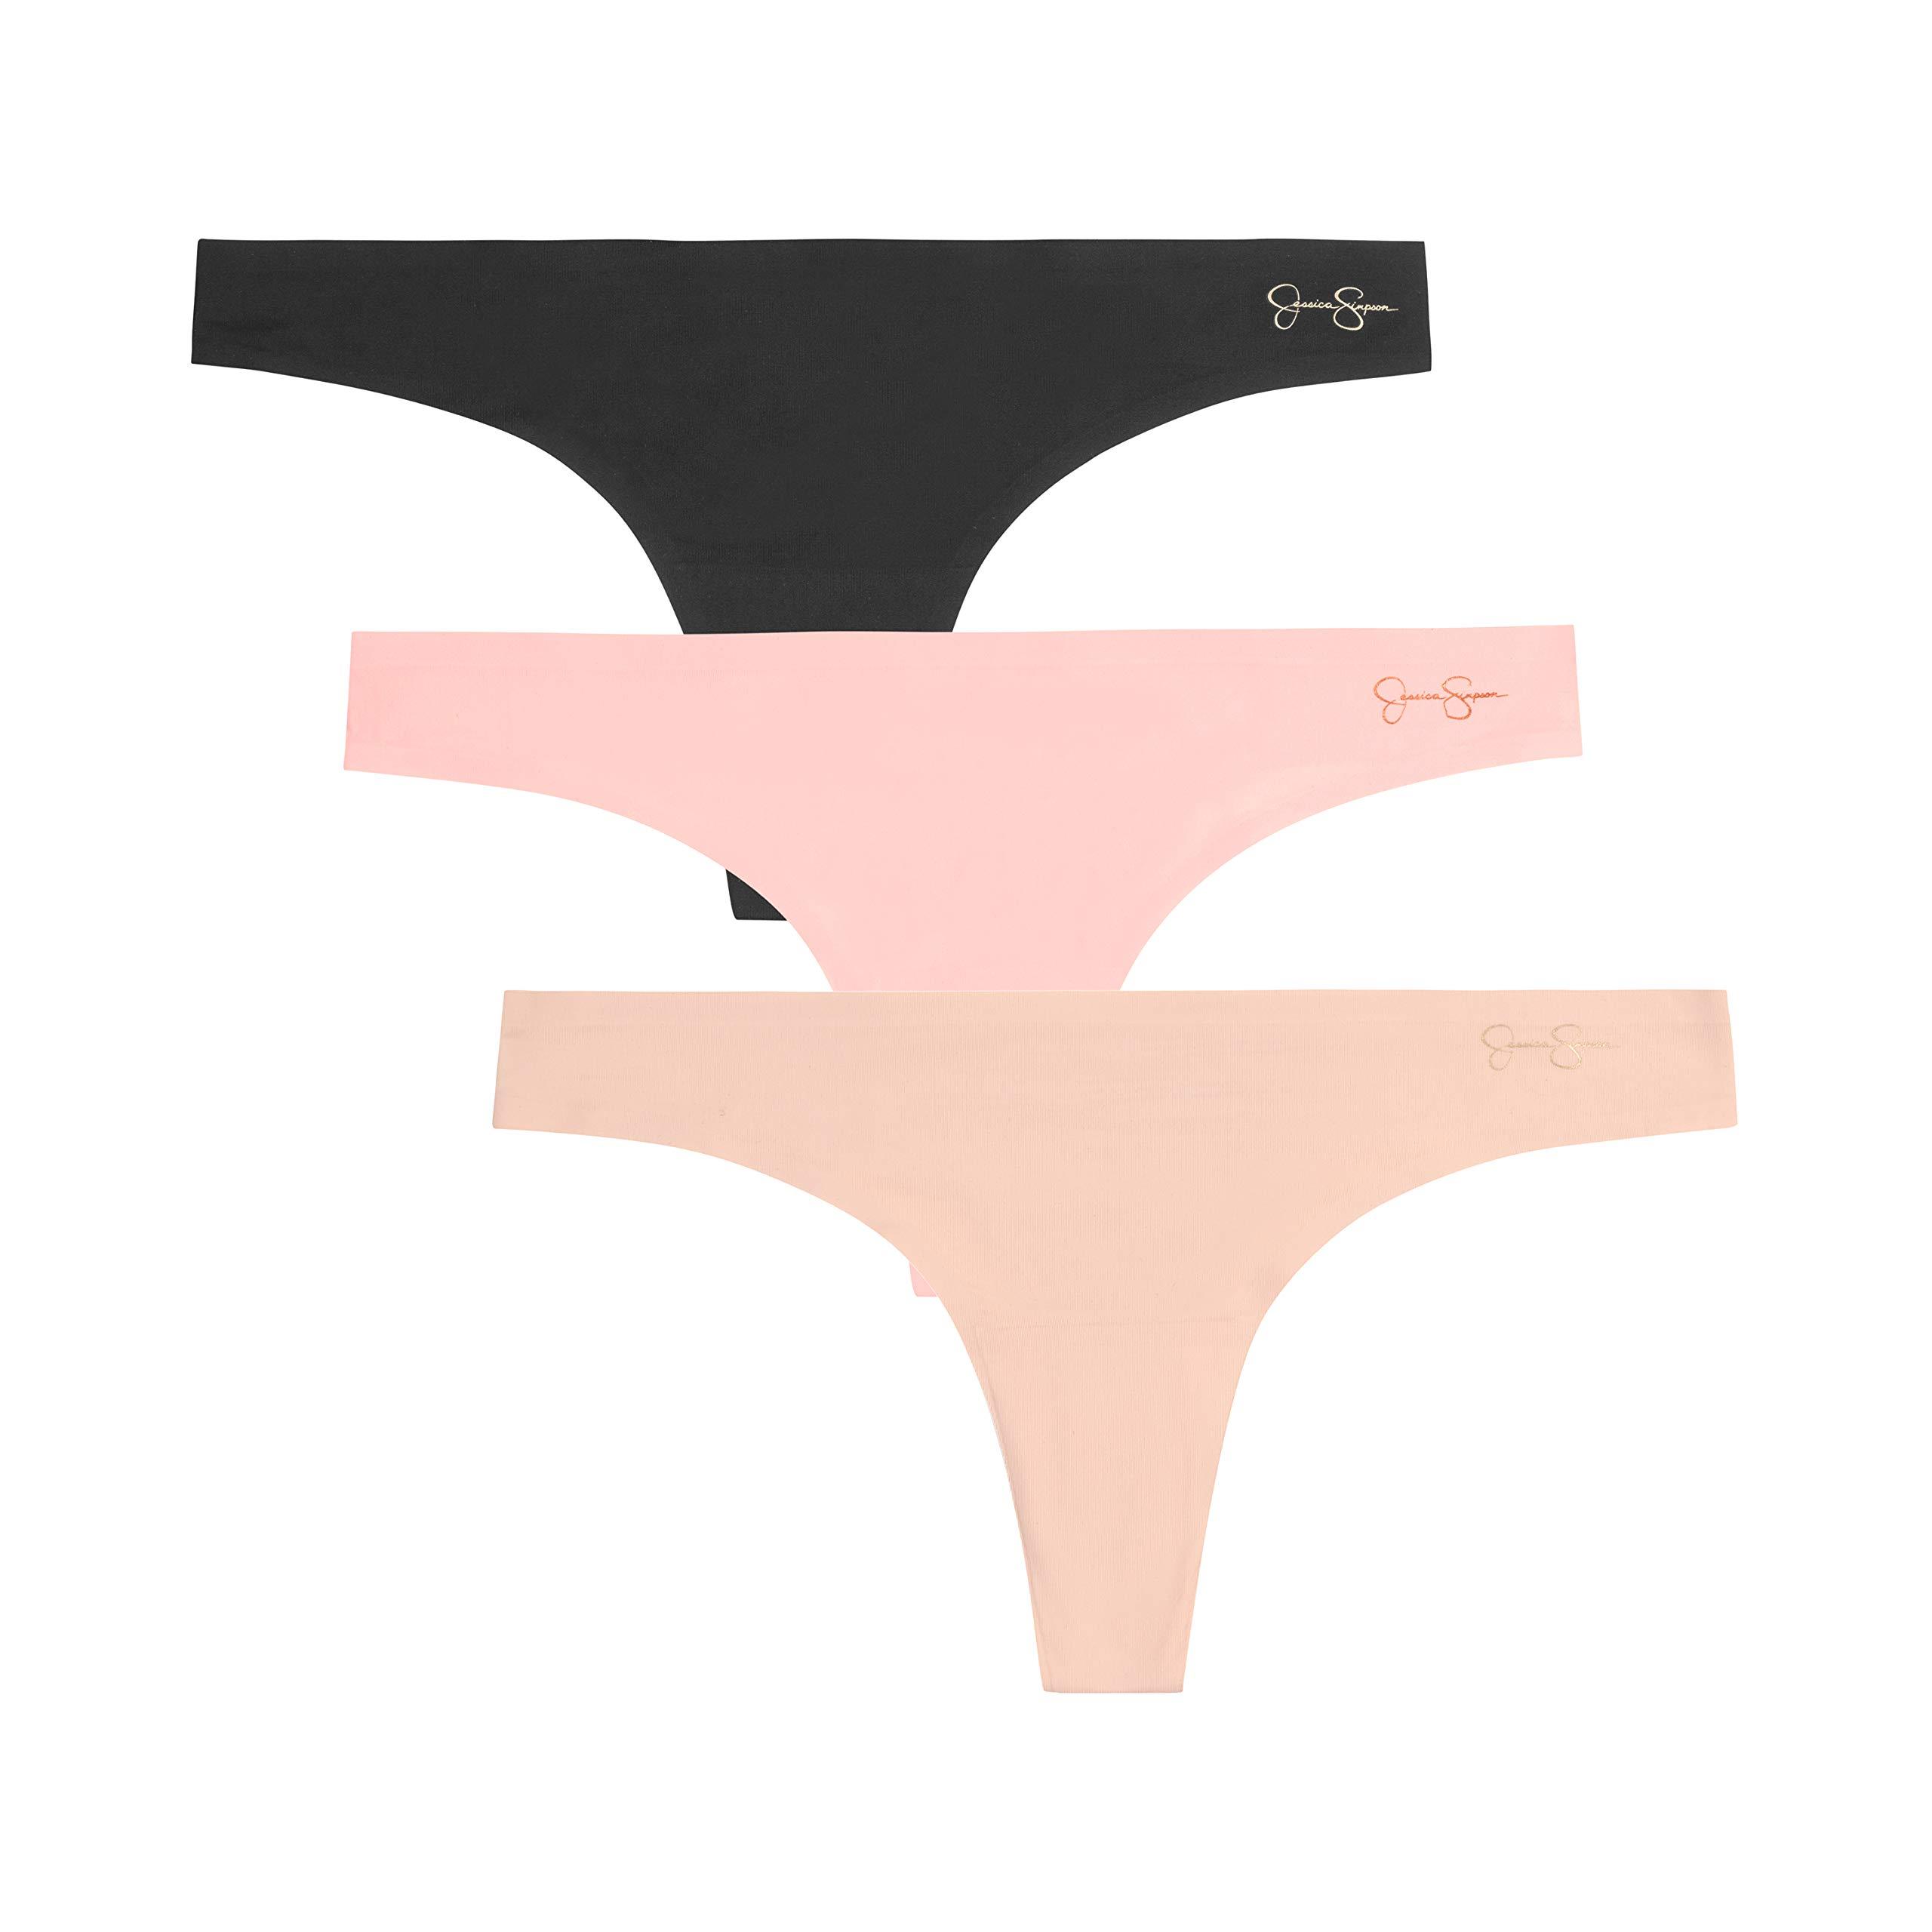 Jessica Simpson No Show Thong Panties Underwear Multi-pack, in